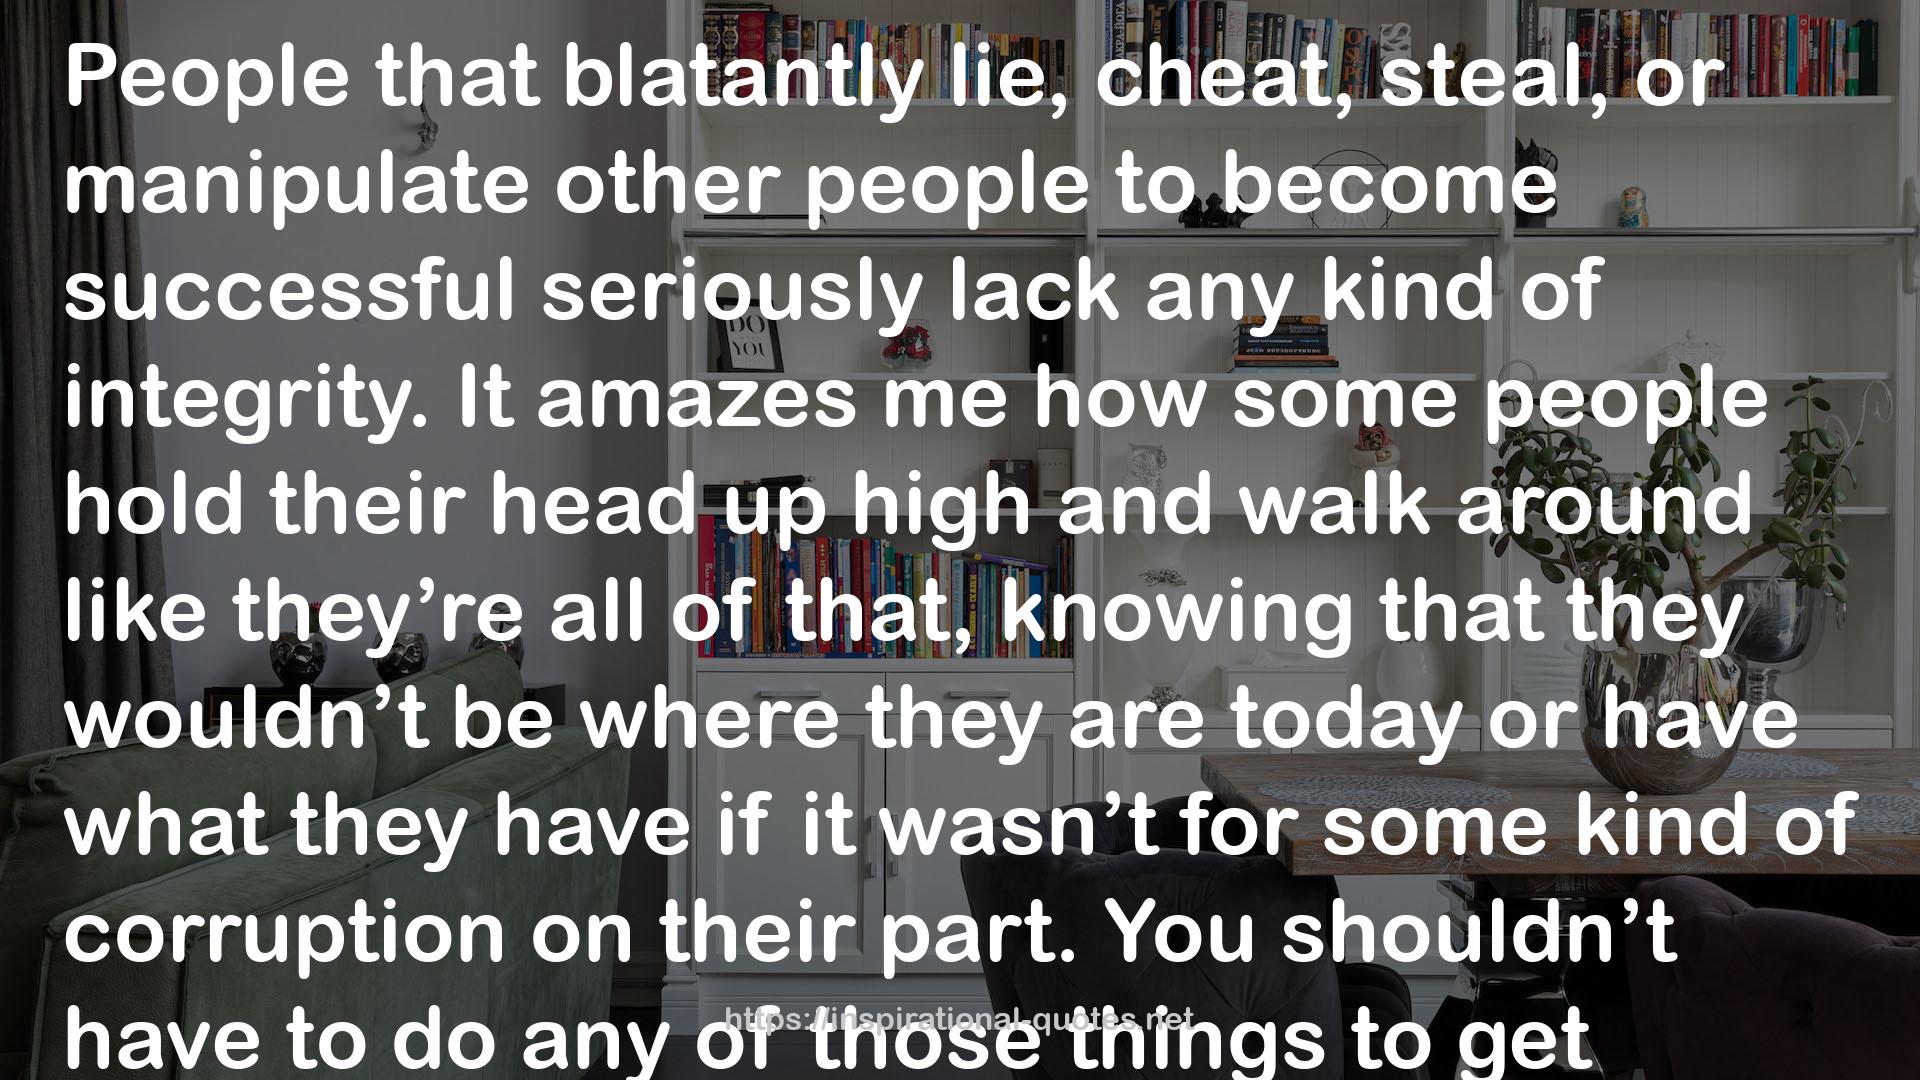 Stephanie Lahart quote : People that blatantly lie, cheat, steal, or manipulate other people to become successful seriously lack any kind of integrity. It amazes me how some people hold their head up high and walk around like they’re all of that, knowing that they wouldn’t be where they are today or have what they have if it wasn’t for some kind of corruption on their part. You shouldn’t have to do any of those things to get ahead. I am greatness! I vow to NOT compromise my character in any way, shape, or form while building my empire. I represent excellence and I have no desire to be anything less.